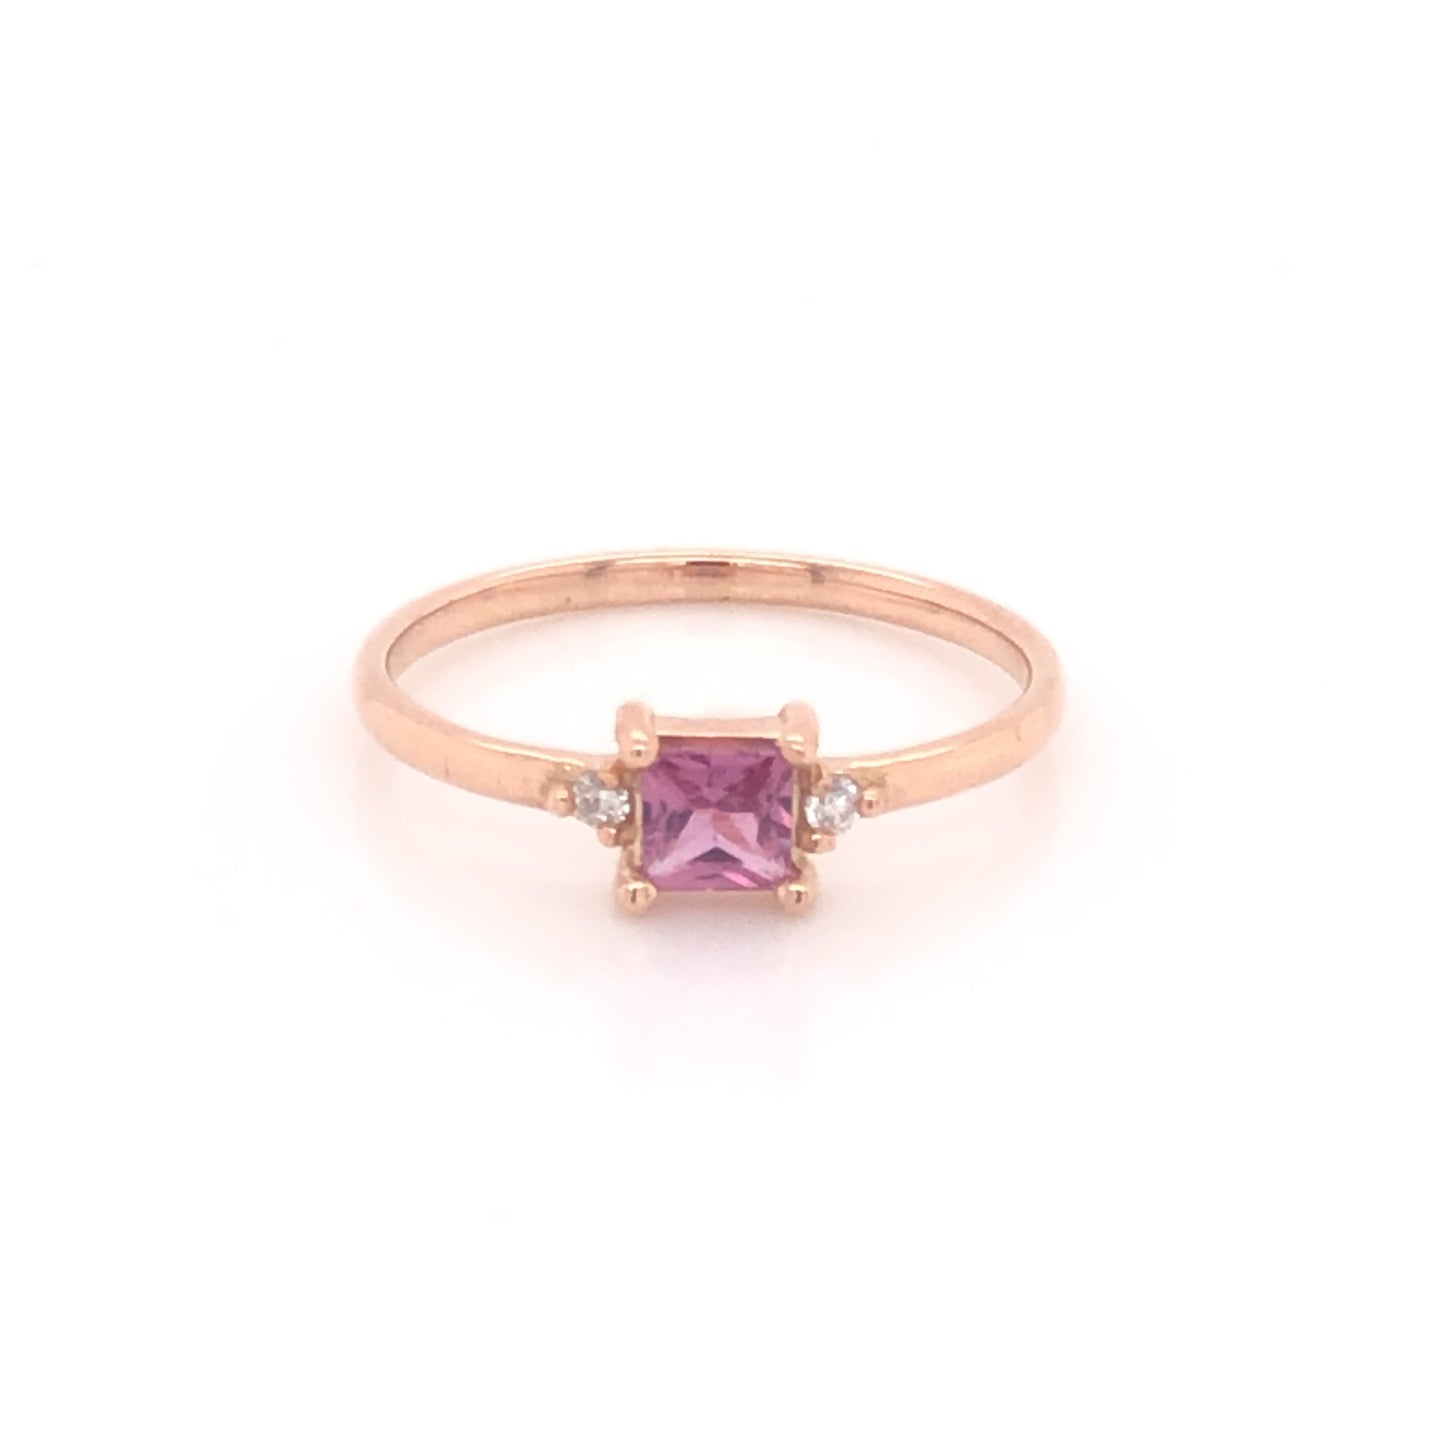 IMMEDIATE DELIVERY / UNIQUE PIECE / Princess Cut Sapphire Ring with Diamonds / 14k Rose Gold / Size 6